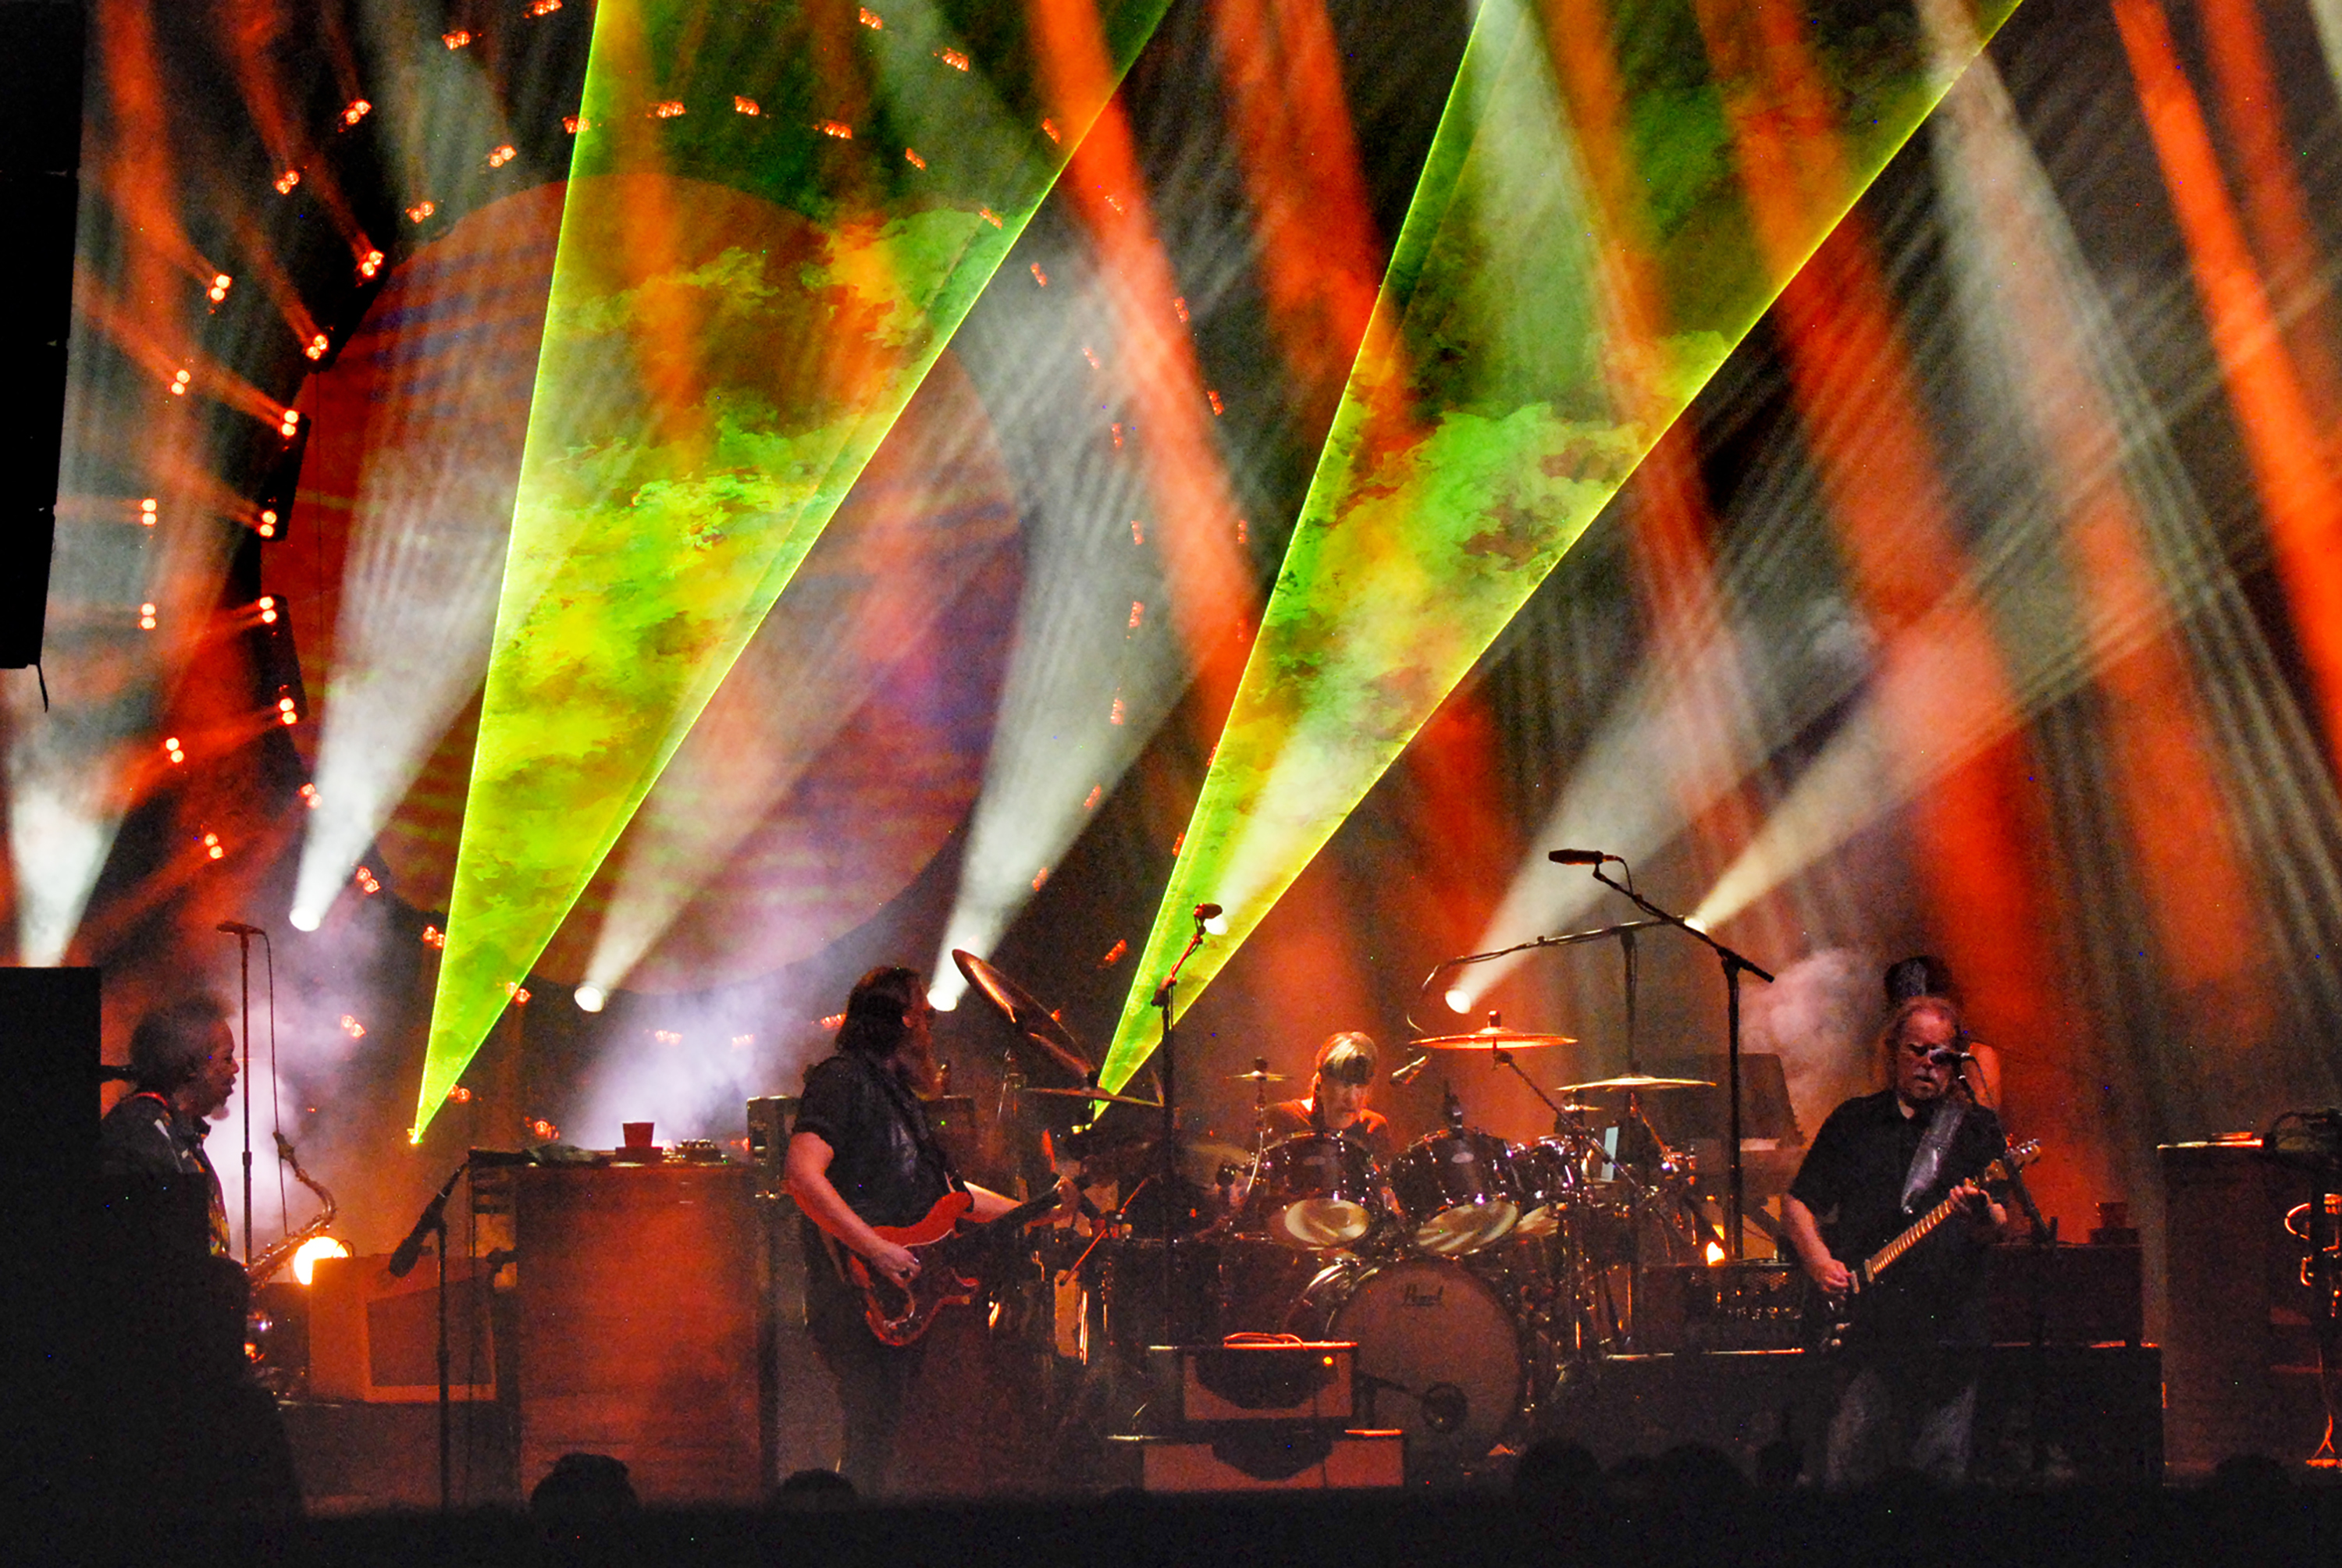 Gov't Mule with 3-D laser effects